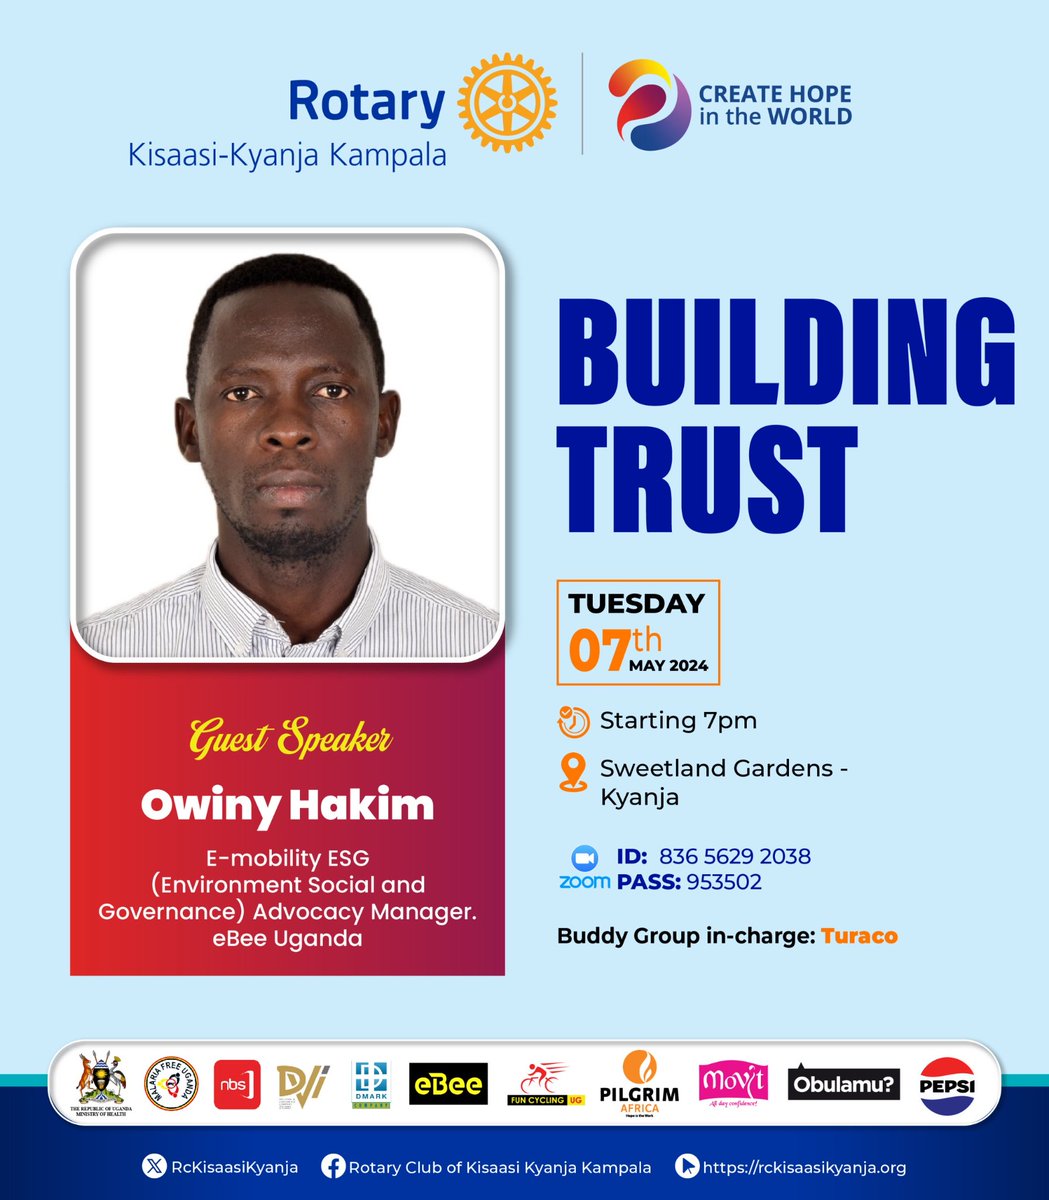 Join us Tomorrow May 7th , Fellowship with @RcKisaasiKyanja , Where we'll be exploring a vital aspect of Building Trust in our Communities structures. #BuildingTrust #HumanityFirst @Rotary @exchangealumni @WashFellowship @usmissionuganda @GovUganda @GenWamala @eBee_Africa